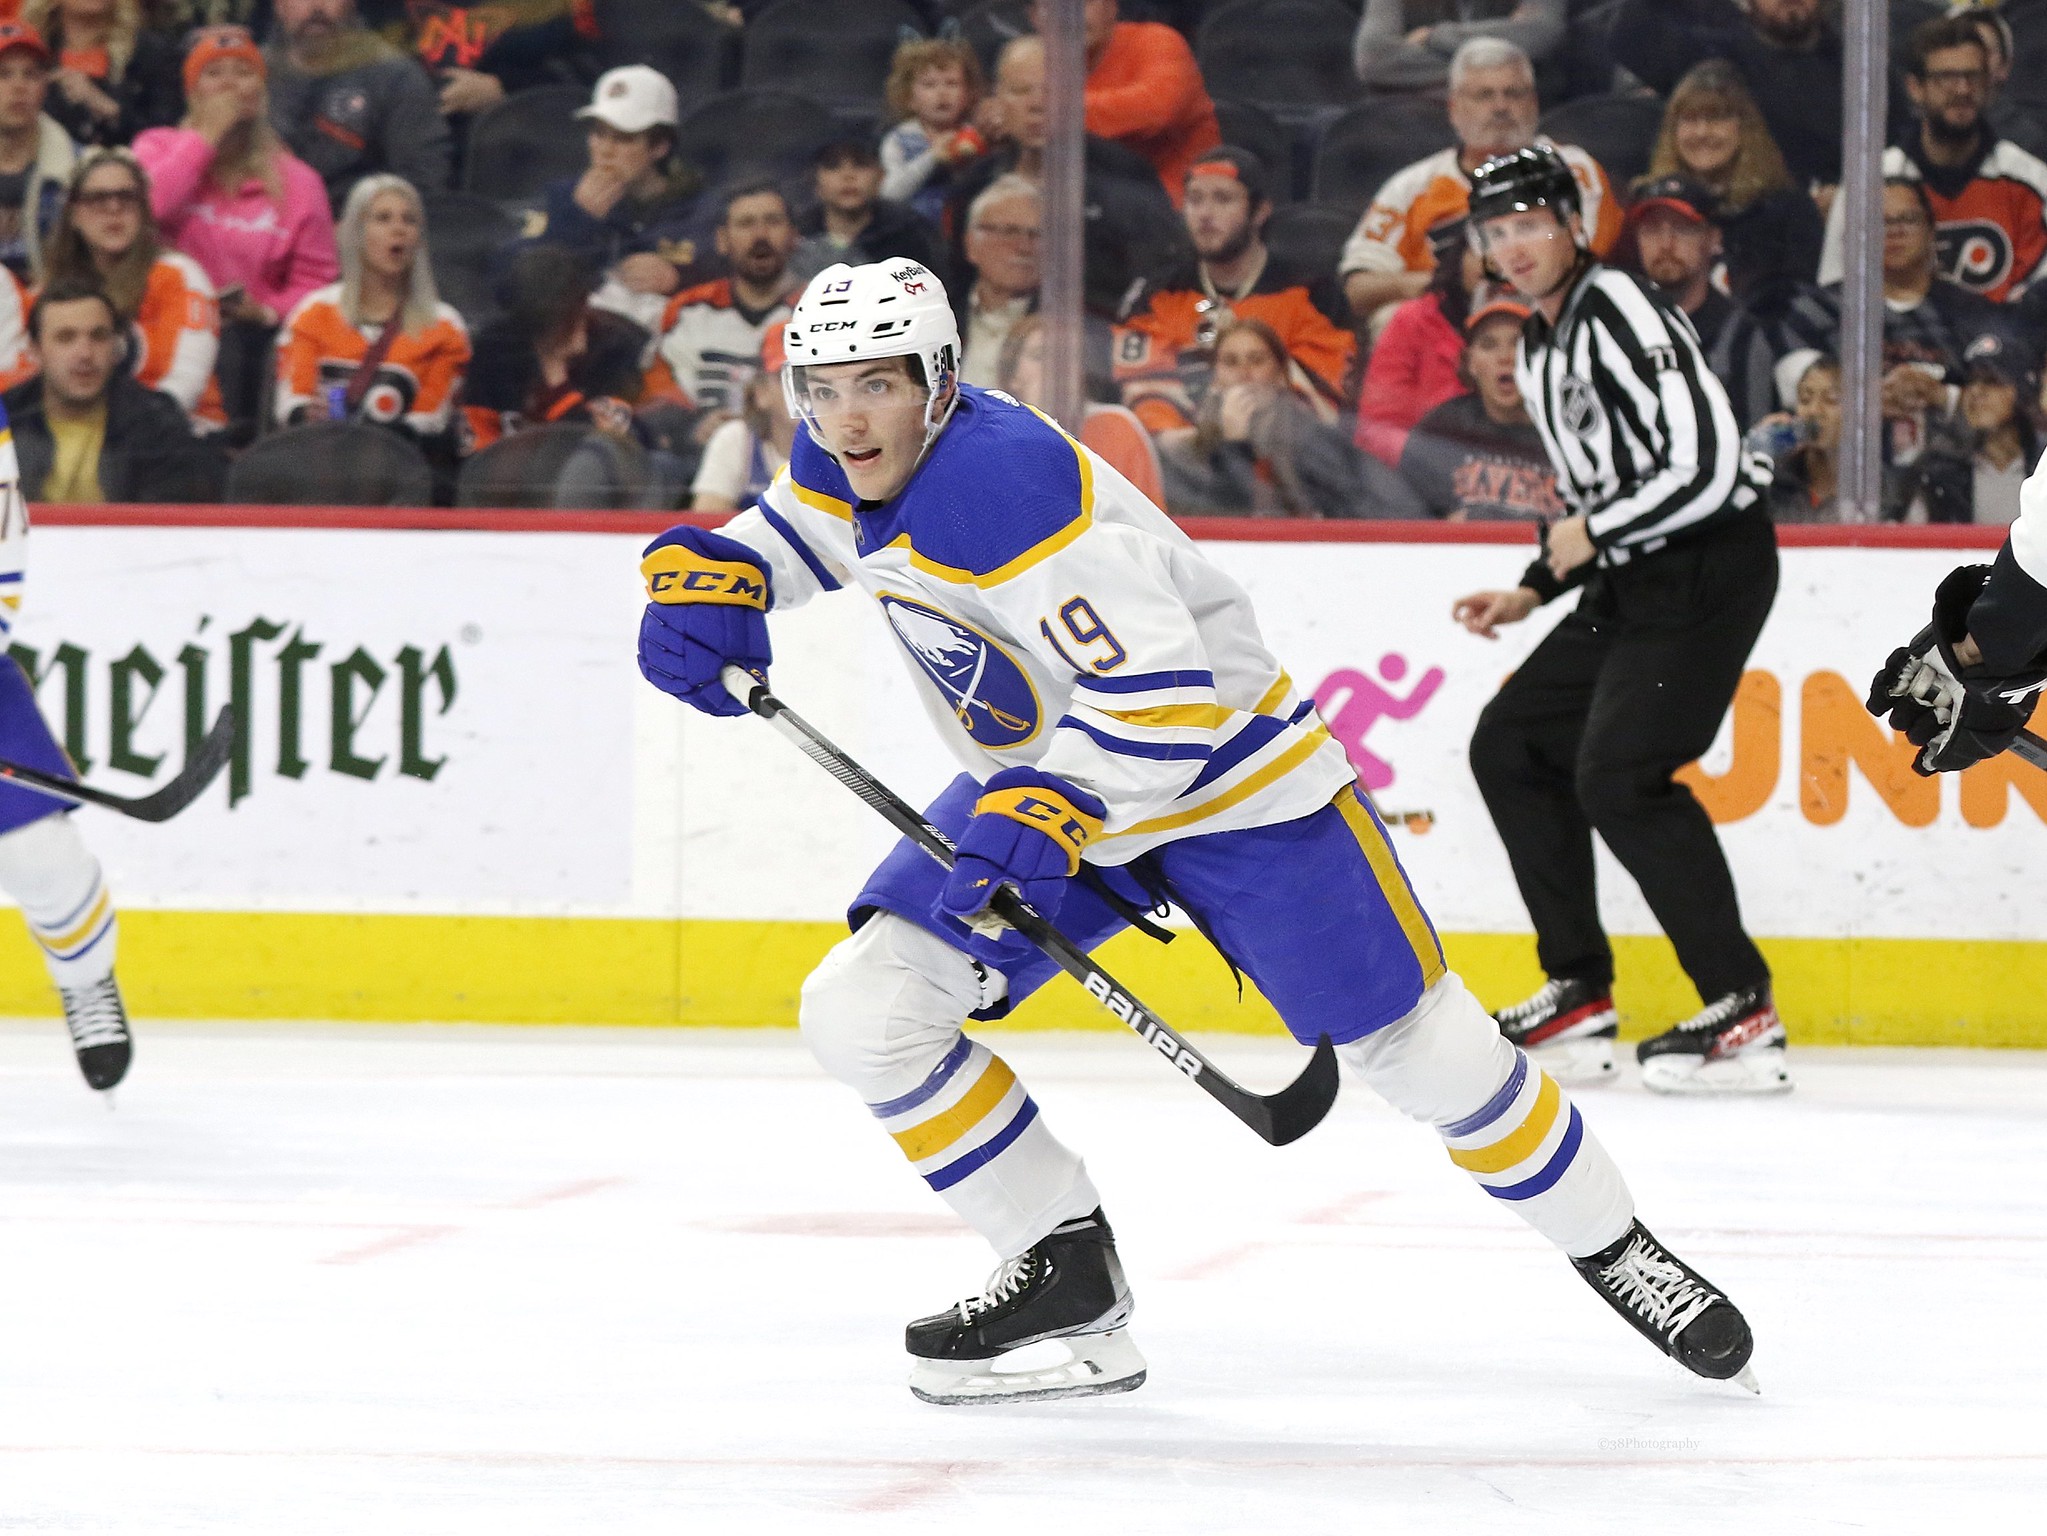 Sabres' Krebs & Samuelsson Give AHL Affiliate Amerks a Boost in Playoffs - The Hockey Writers